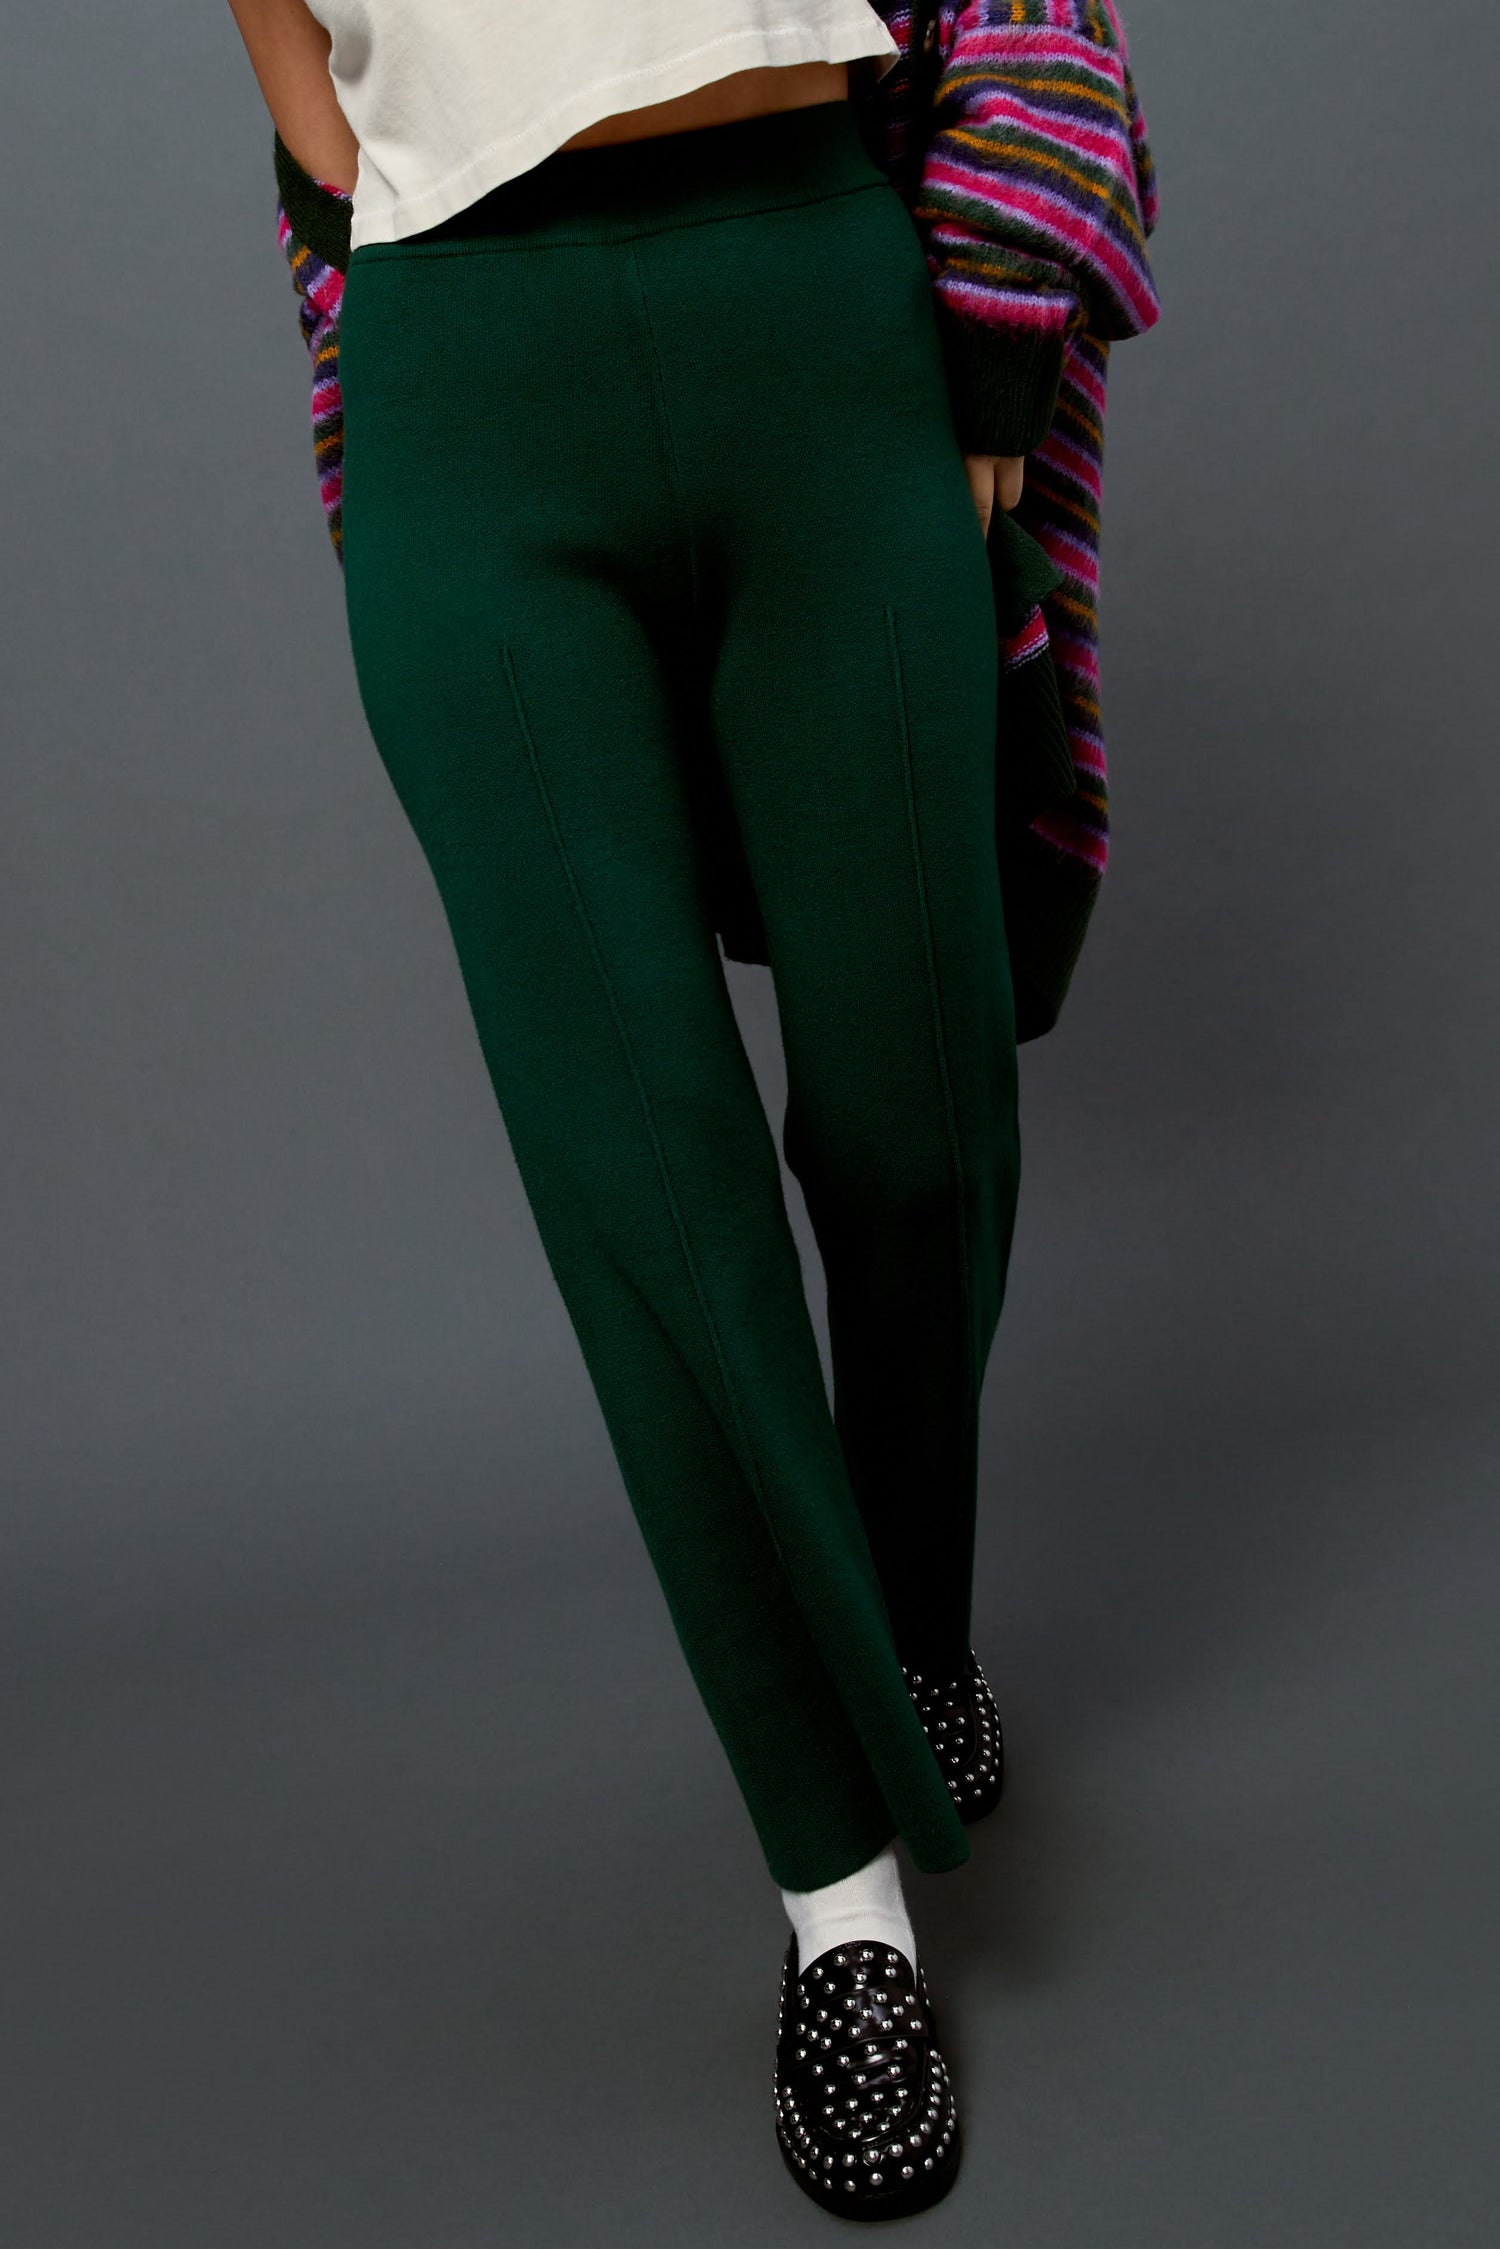 Model wearing a pair of knit pintuck pants in hunter green